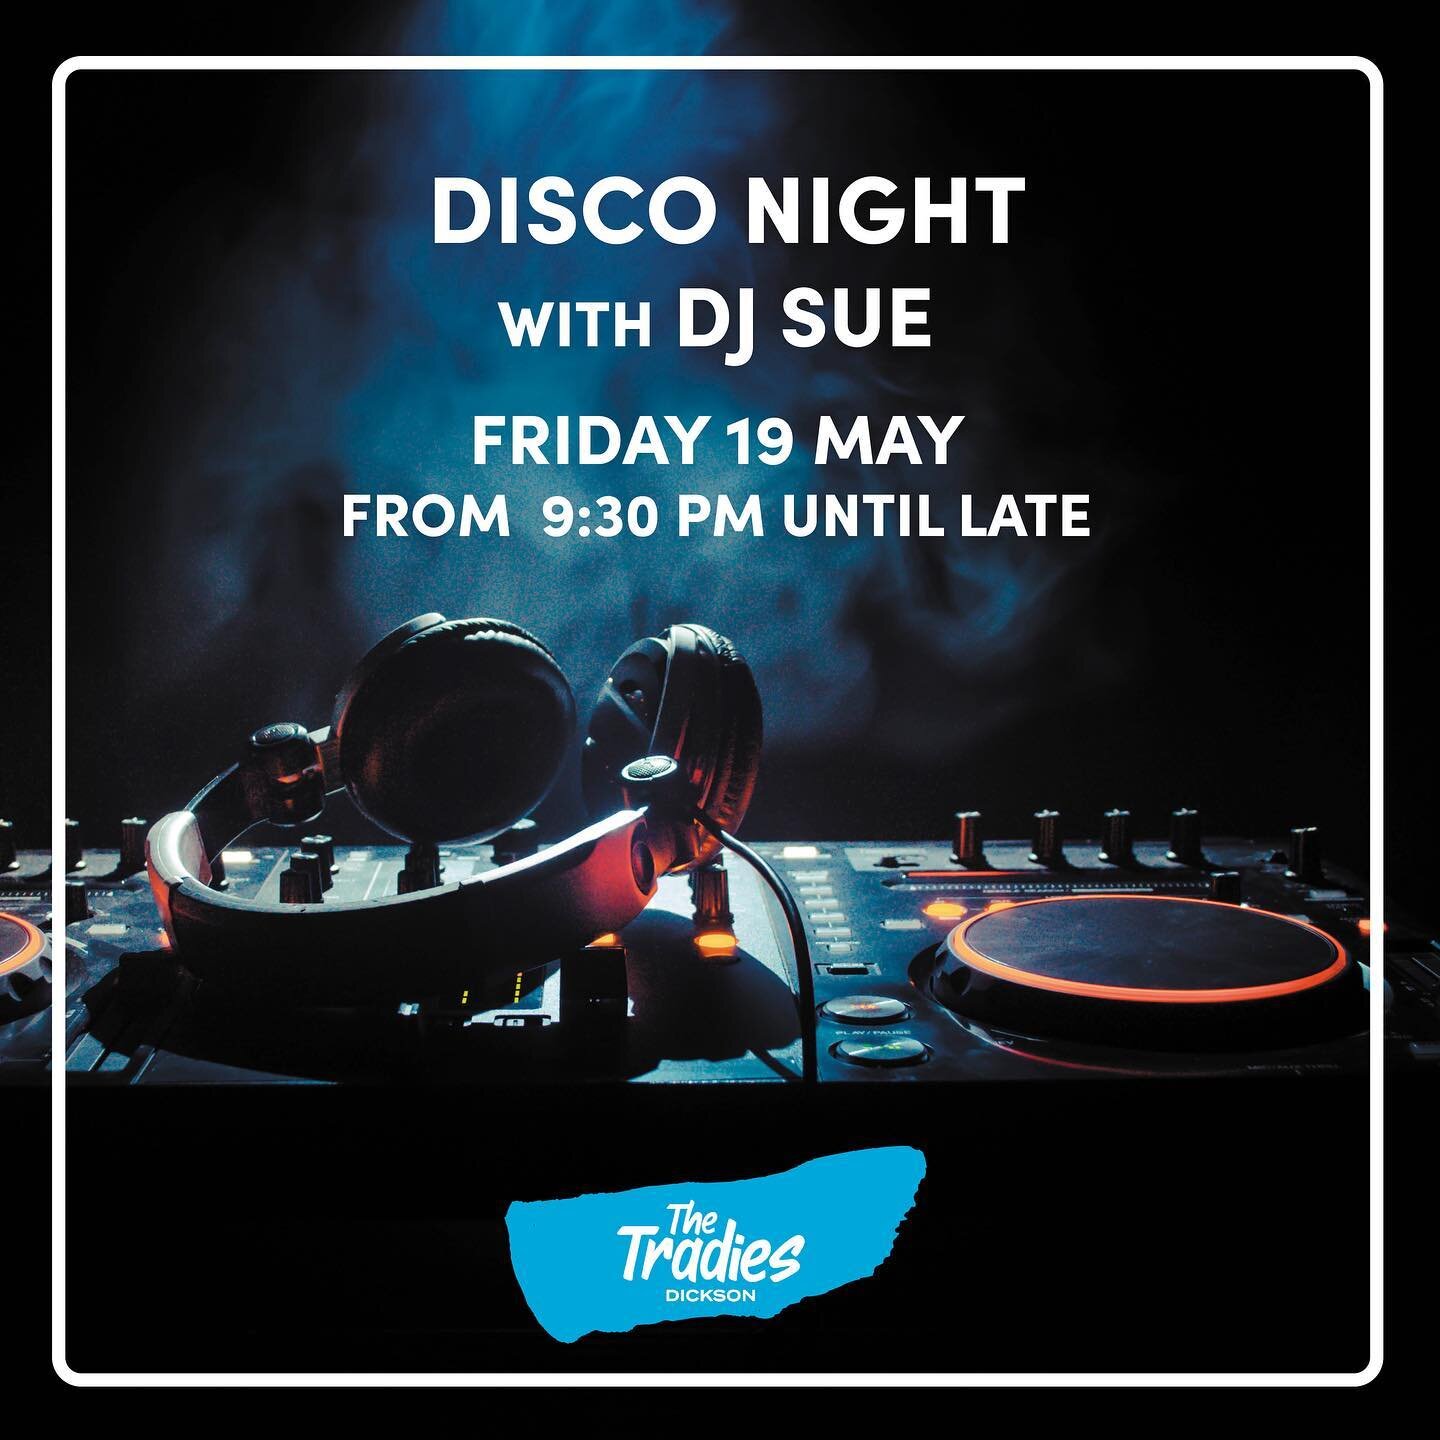 Get ready to shake, shimmy, and boogie down on Friday 19 May at The Tradies lounge! We've got a wild and funky night planned with the one and only DJ Sue, who will be serving up non-stop beats and contagious energy on the dance floor. So put on your 